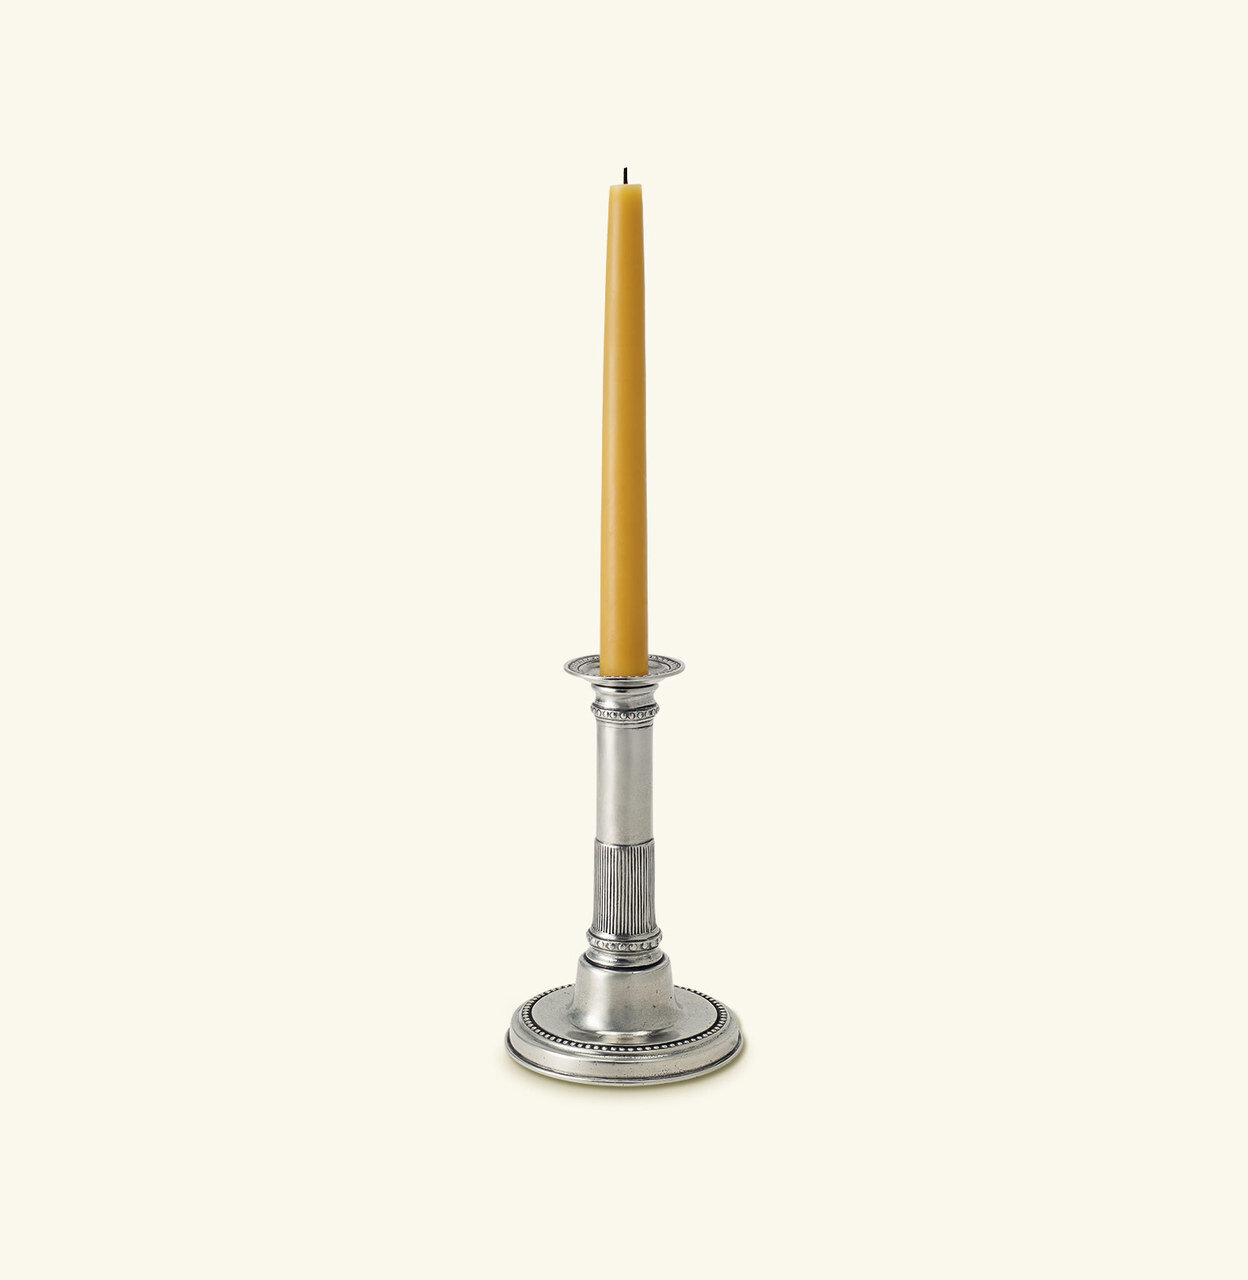 Match Pewter Round Based Candlestick 1013